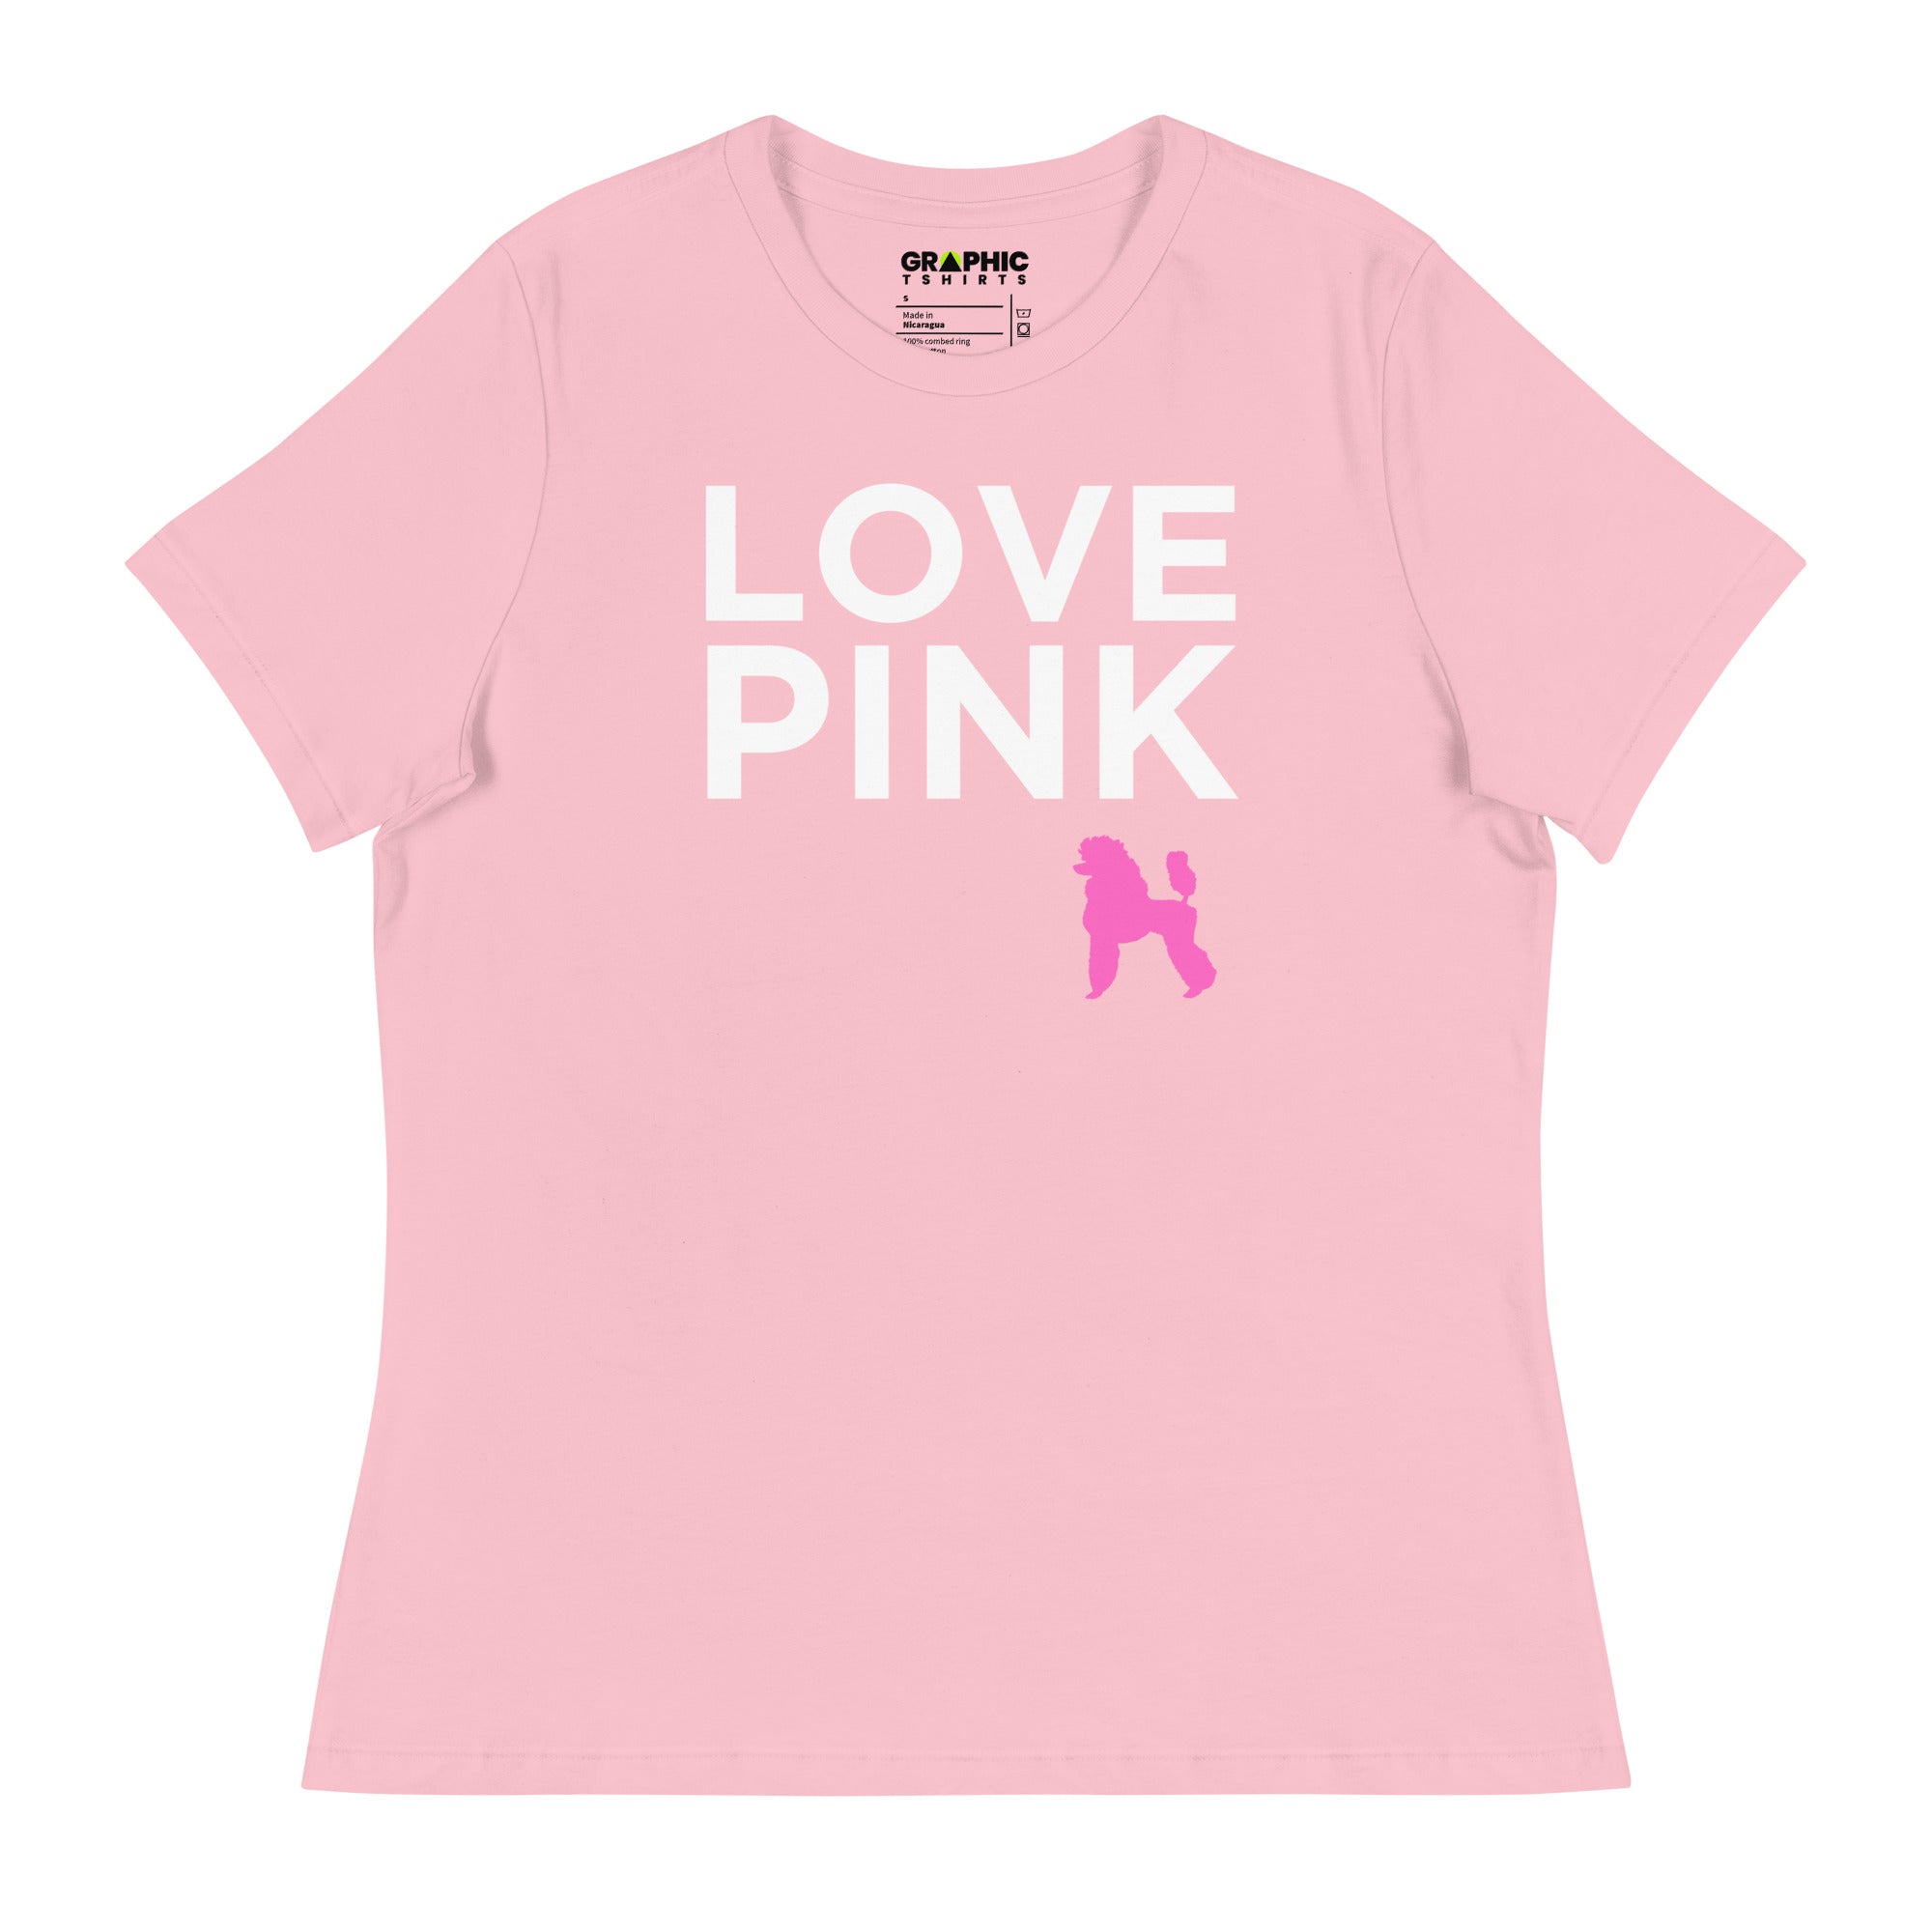 Women's Relaxed T-Shirt - Love Pink - GRAPHIC T-SHIRTS